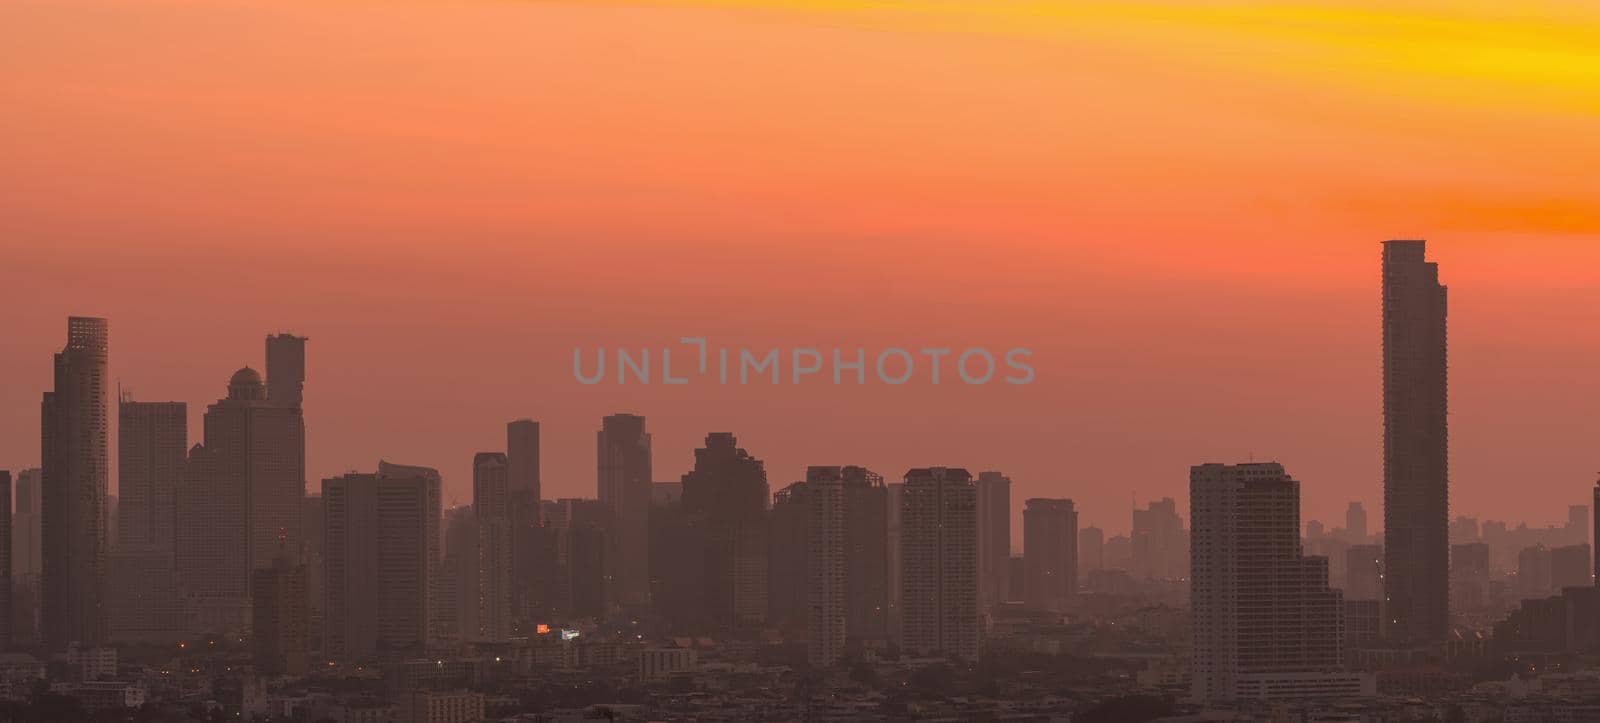 Air pollution. Smog and fine dust of pm2.5 covered city in the morning with orange sunrise sky. Cityscape with polluted air. Dirty environment. Urban toxic dust. Unhealthy air. Urban unhealthy living. by Fahroni